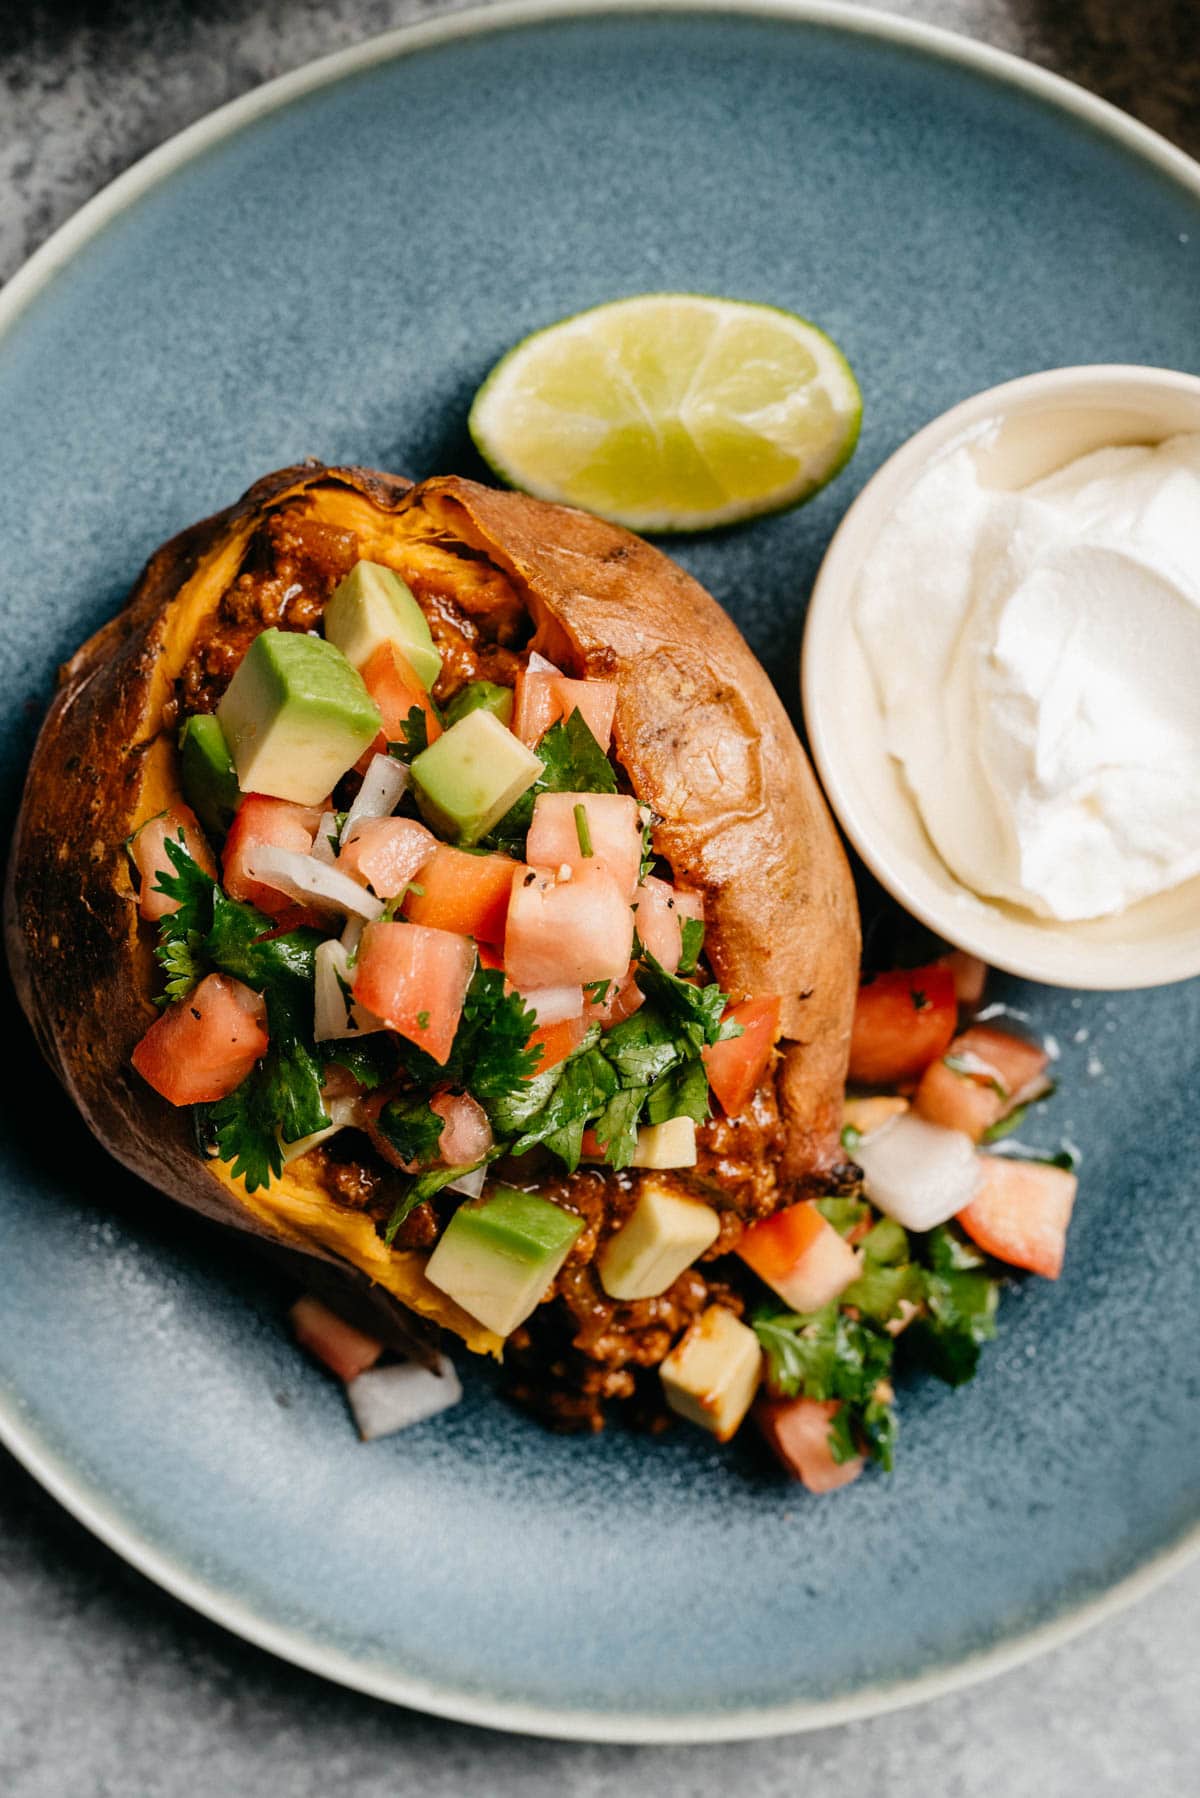 A taco stuffed sweet potato on a blue plate, topped with pico de gallo and avocado; a small dish of sour cream and a lime wedge are also on the plate.